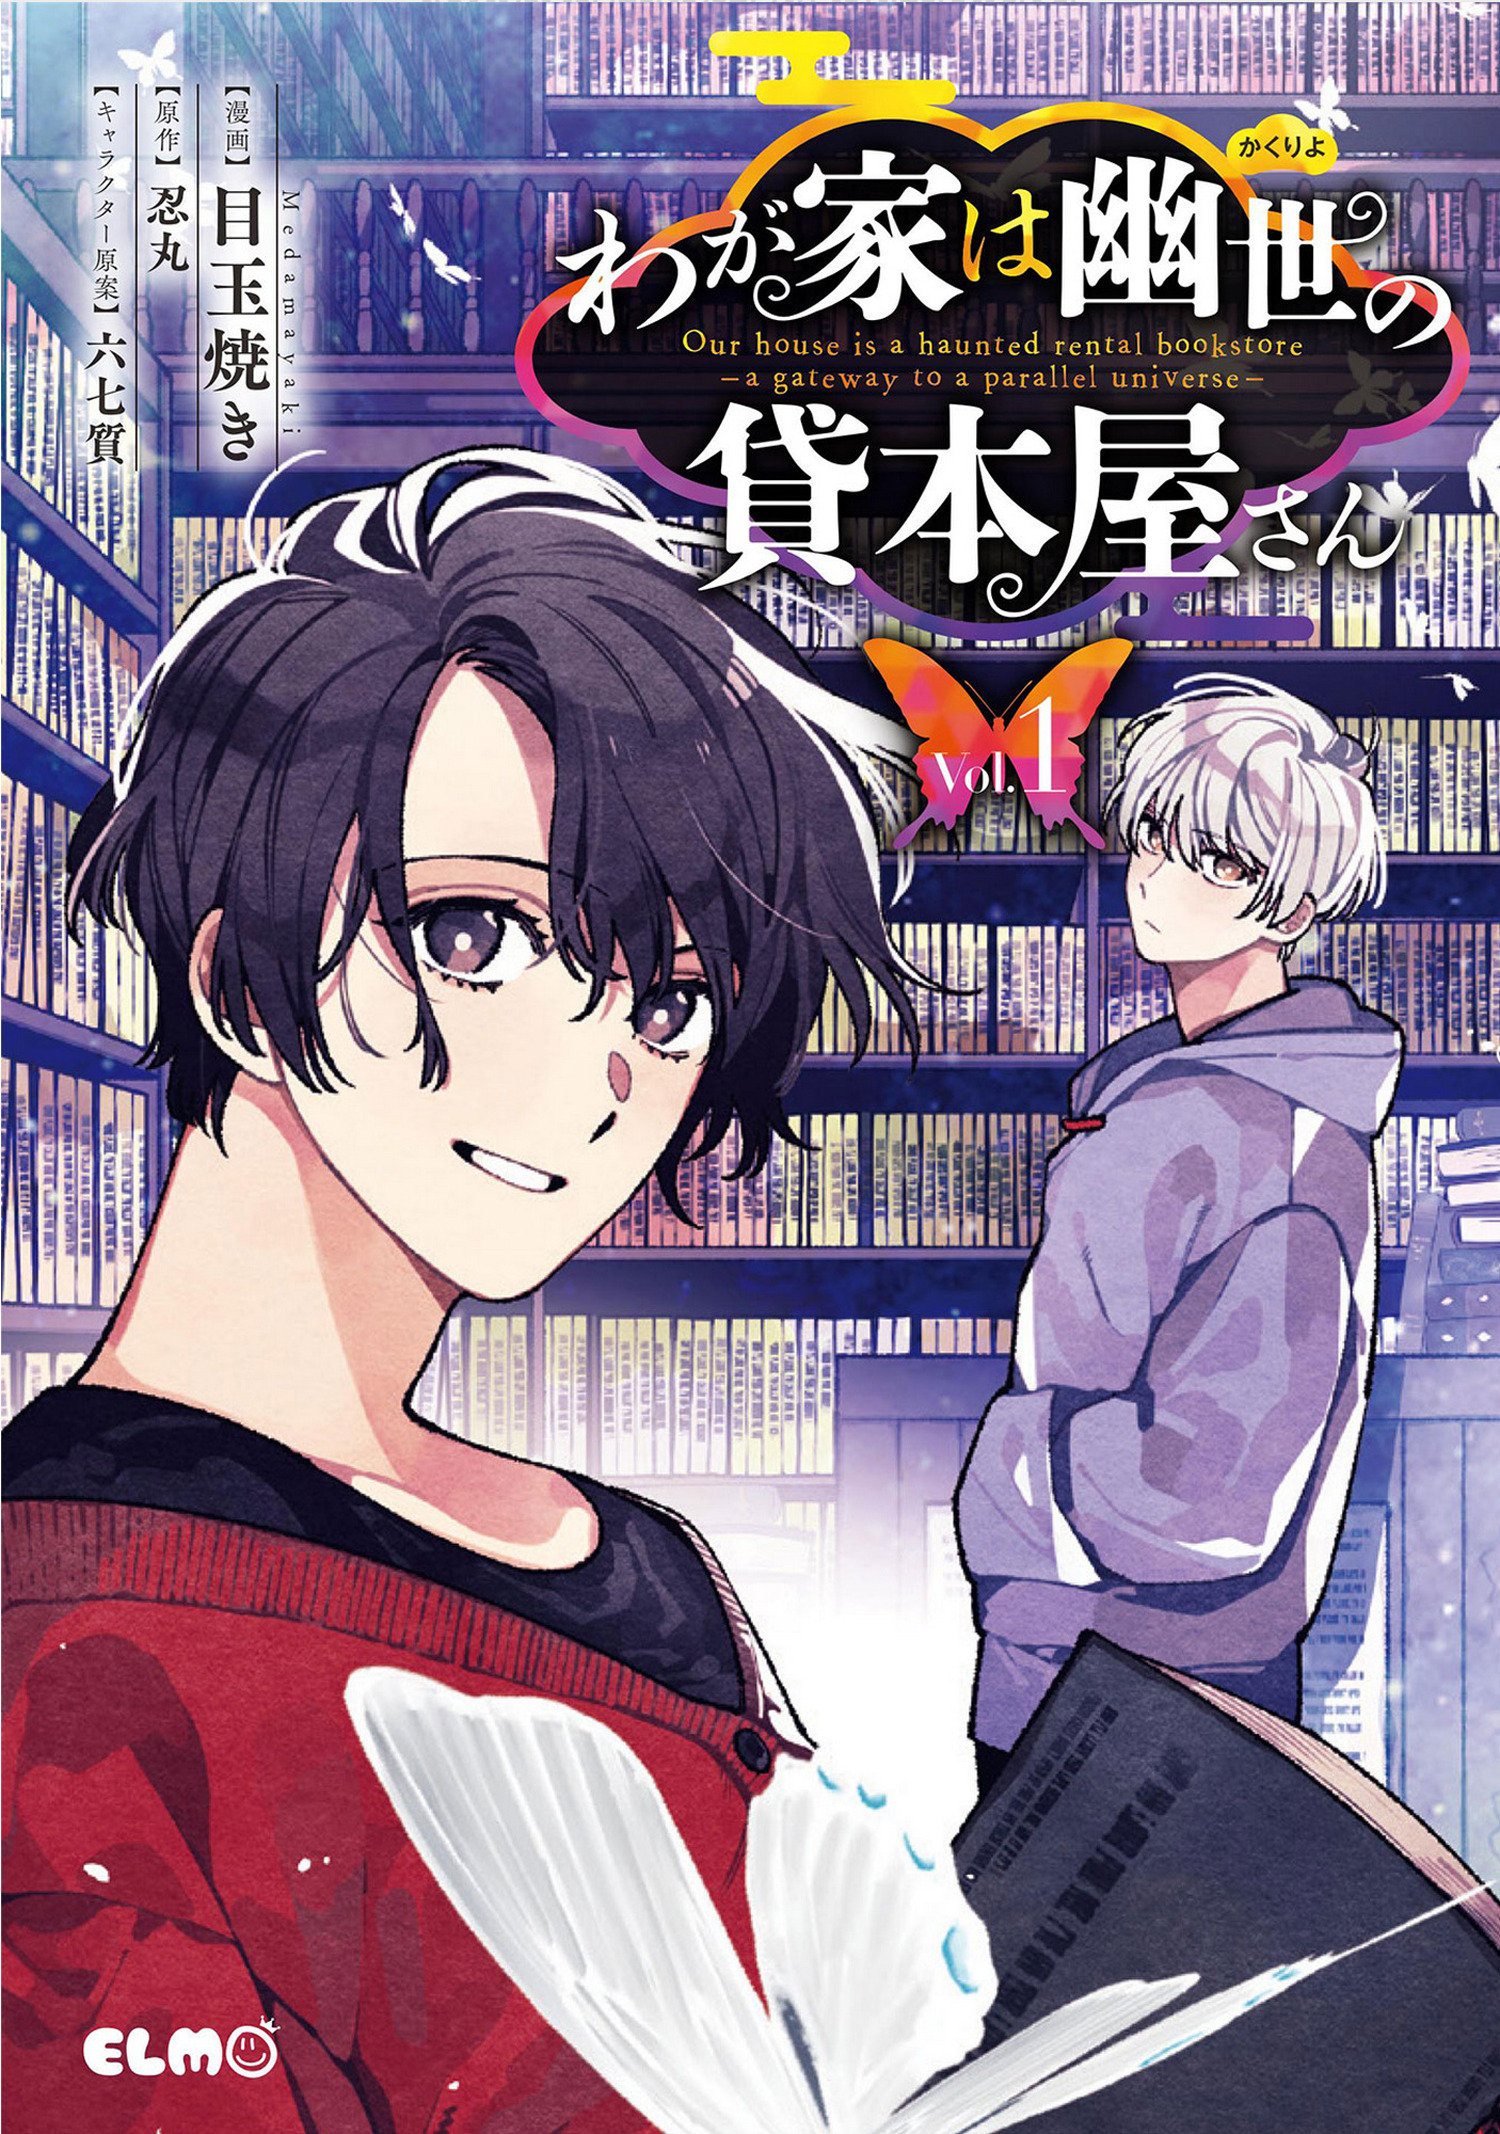 The Haunted Bookstore Gateway to a Parallel Universe Manga Volume 1